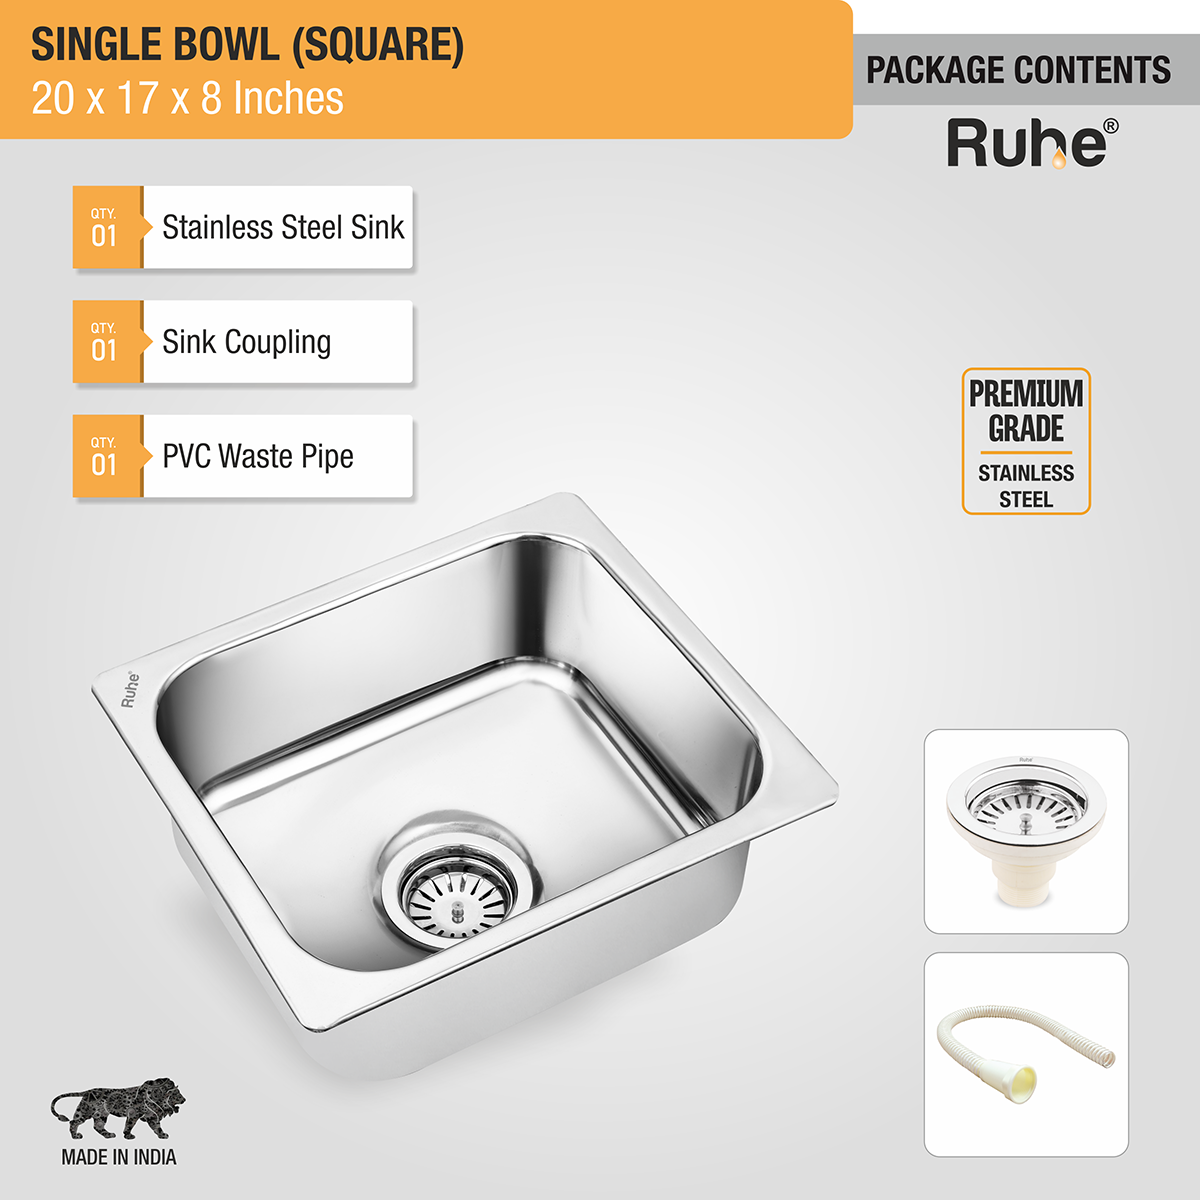 Square Single Bowl Kitchen Sink (20 x 17 x 8 inches) package content with sink coupling and pvc waste pipe